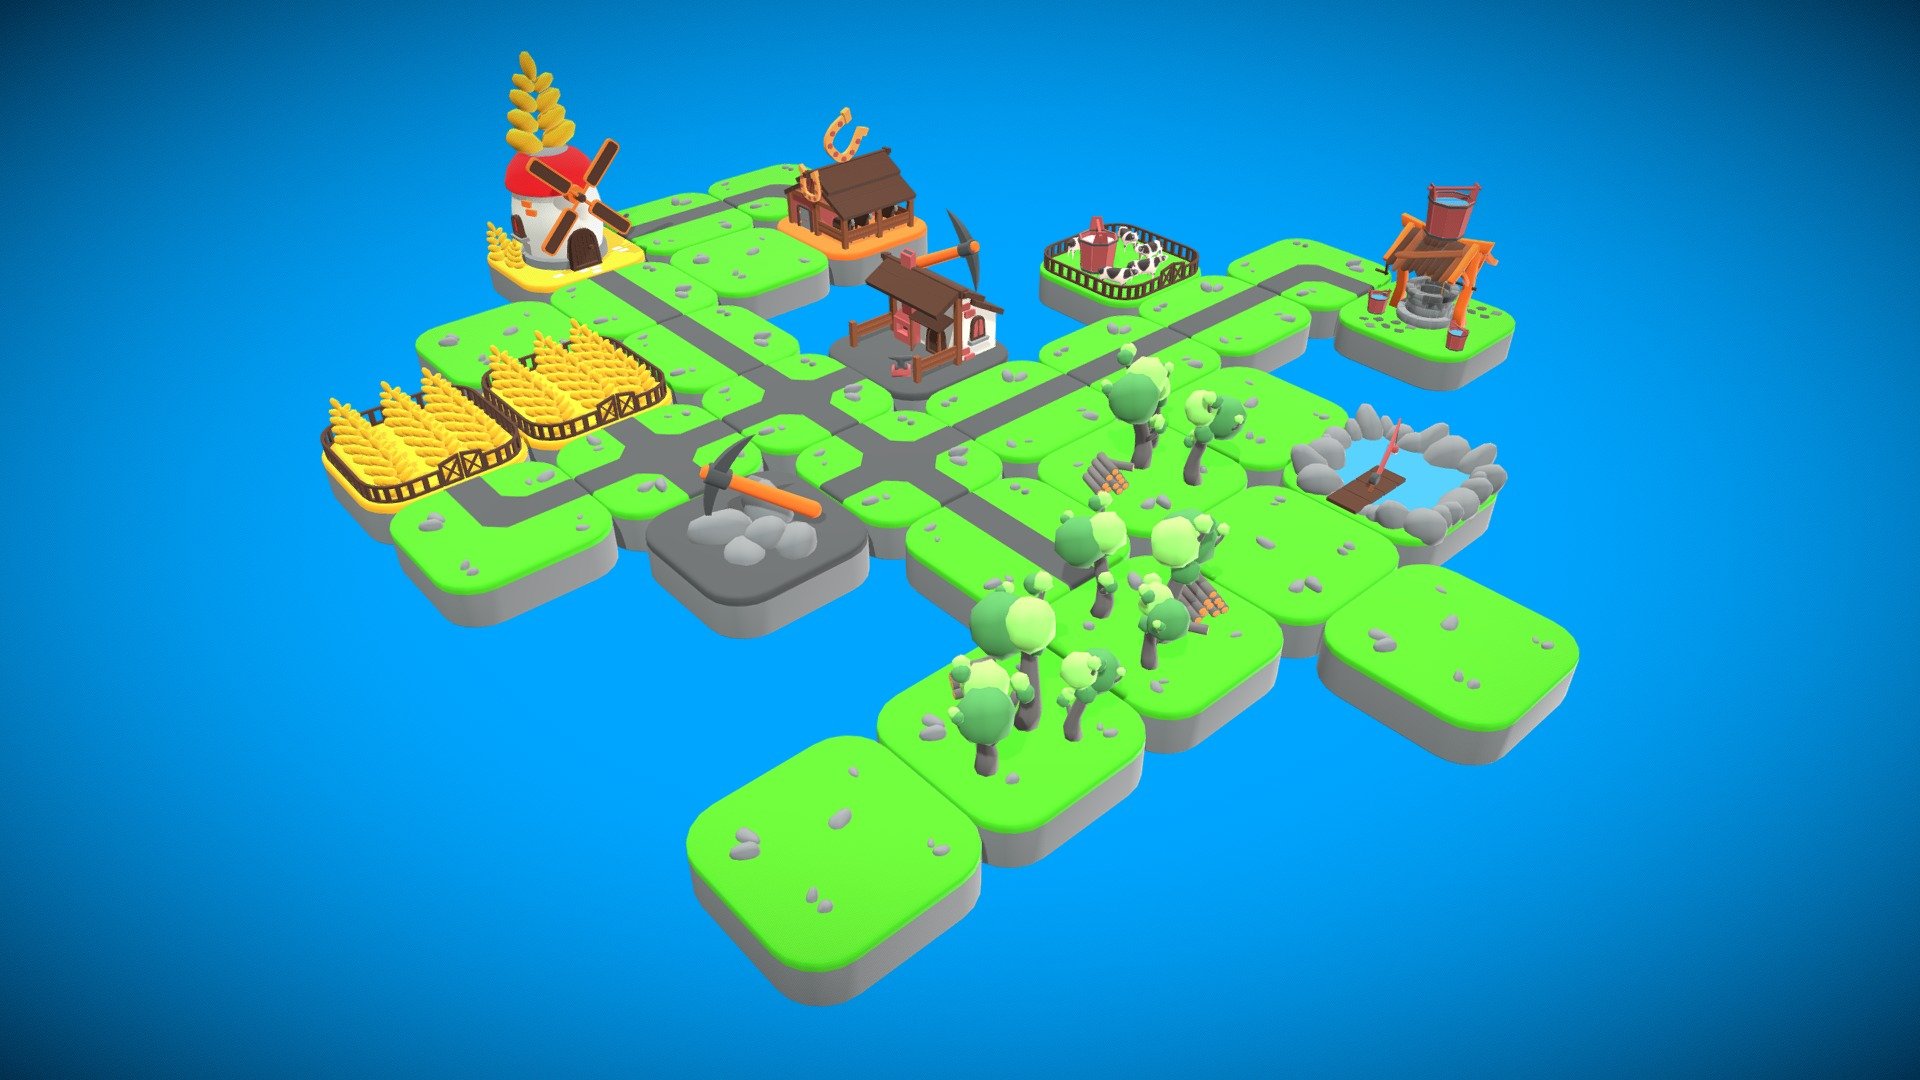 Low poly stylized farm game environment and level design pack.

Good for hyper-hybrid-casual games. Modeled in Blender.

Total 13 Models:

3 Buildings:

-blacksmith

-horse farm

-mill

6 Resource Model:

-tree (wood)

-plantation(grain)

-lake(fish)

-cow barn(milk)

-well(water)

-mine(iron)

**3 Types of Paths **

1 Grass-Empty - Farm Game Level Design Pack - 3D model by kkemalsayli 3d model